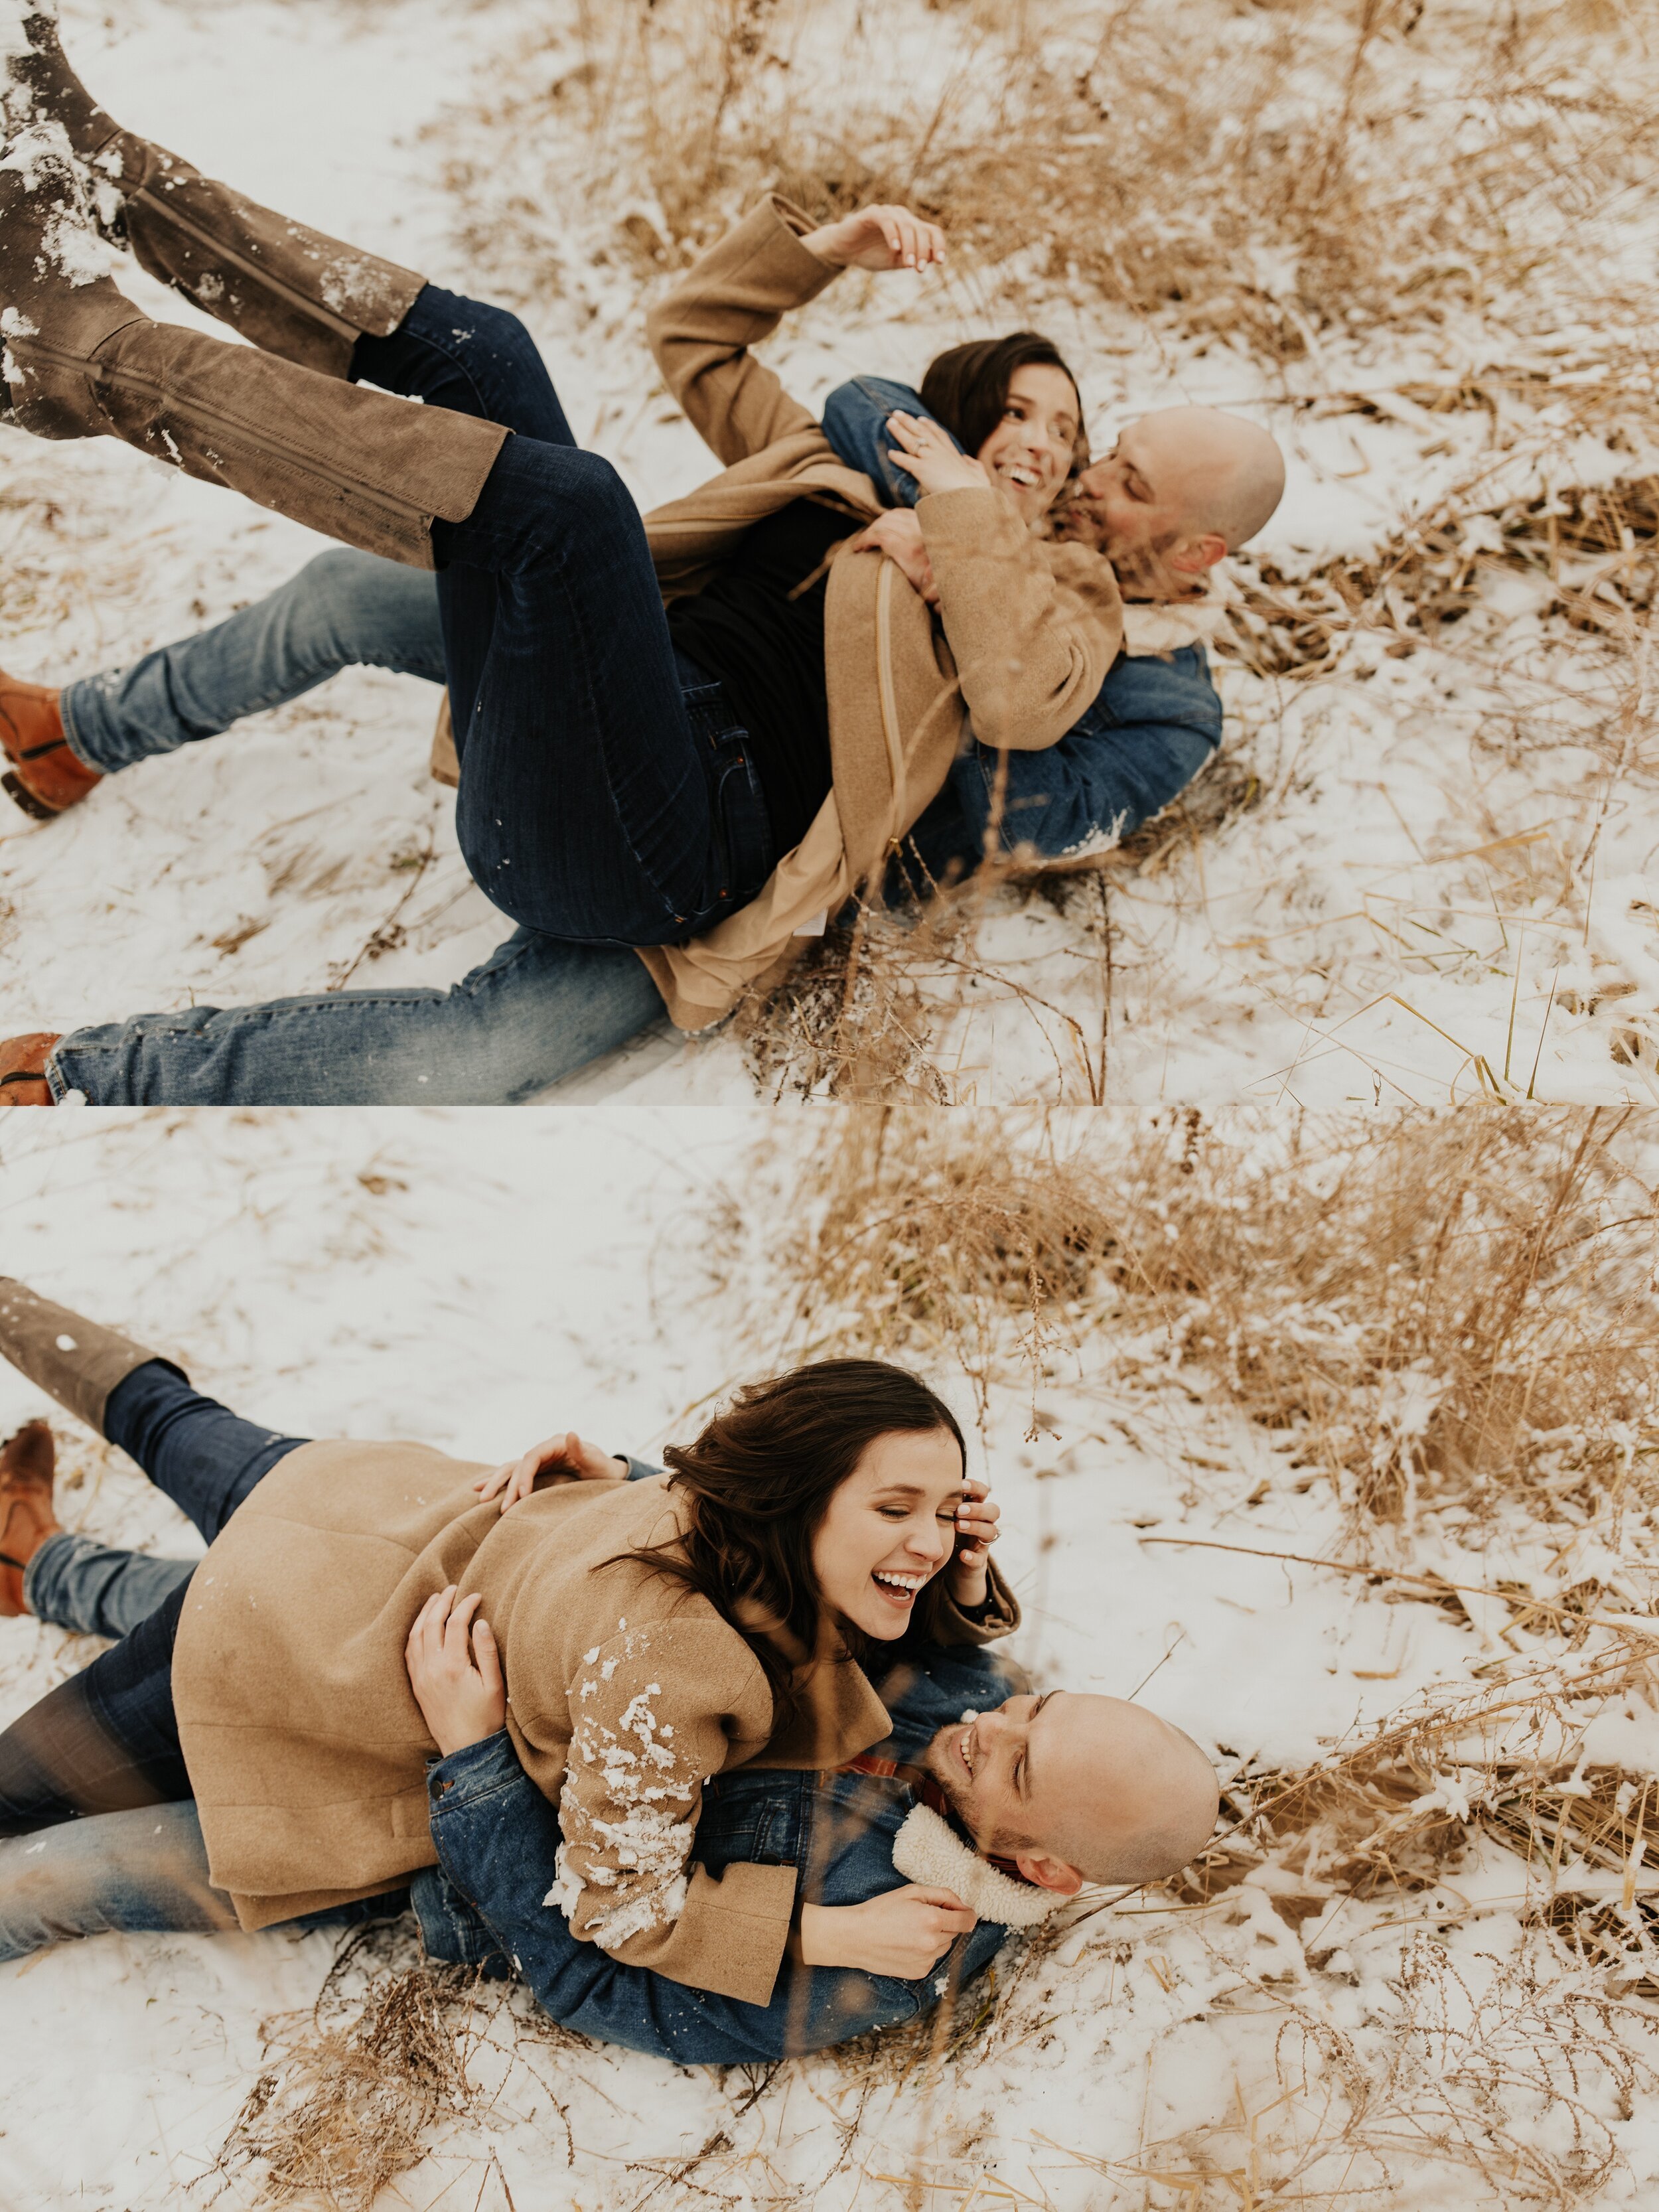 jessika-christine-photography-outdoor-engagement-couples-snow-adventurous-session (18).jpg